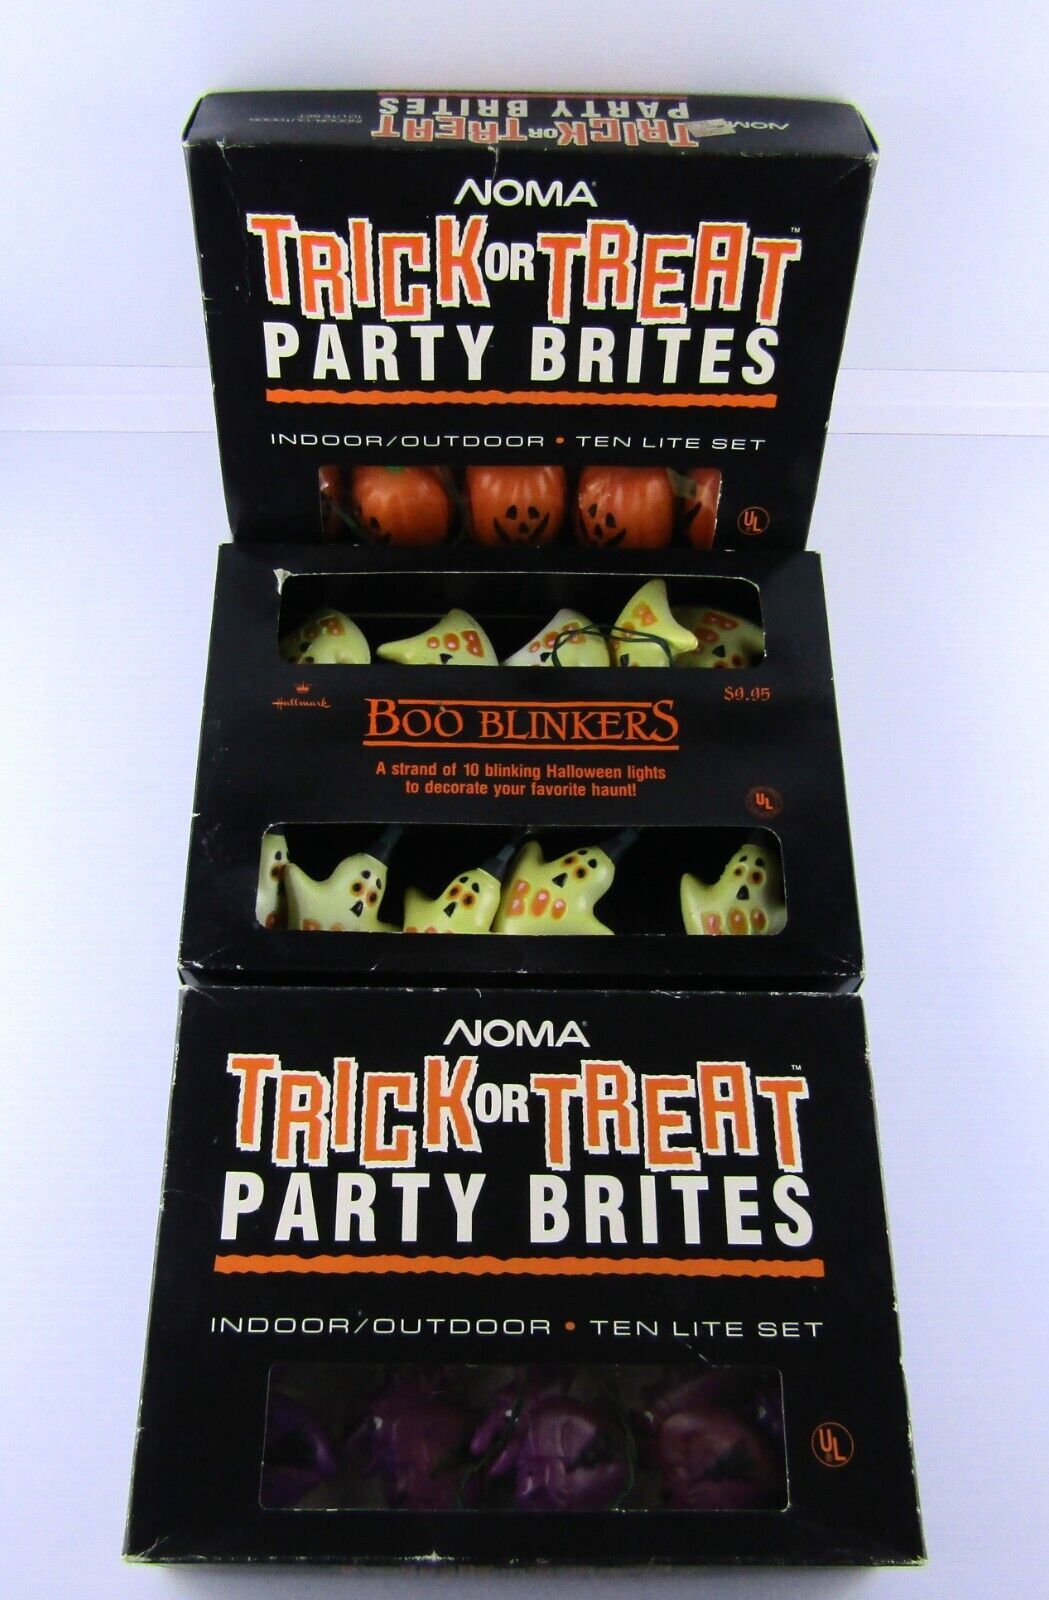 Lot of 3, 1989 Halloween Party Lights Noma, Witch, Boo Blinkers, Pumpkins VTG - $42.82